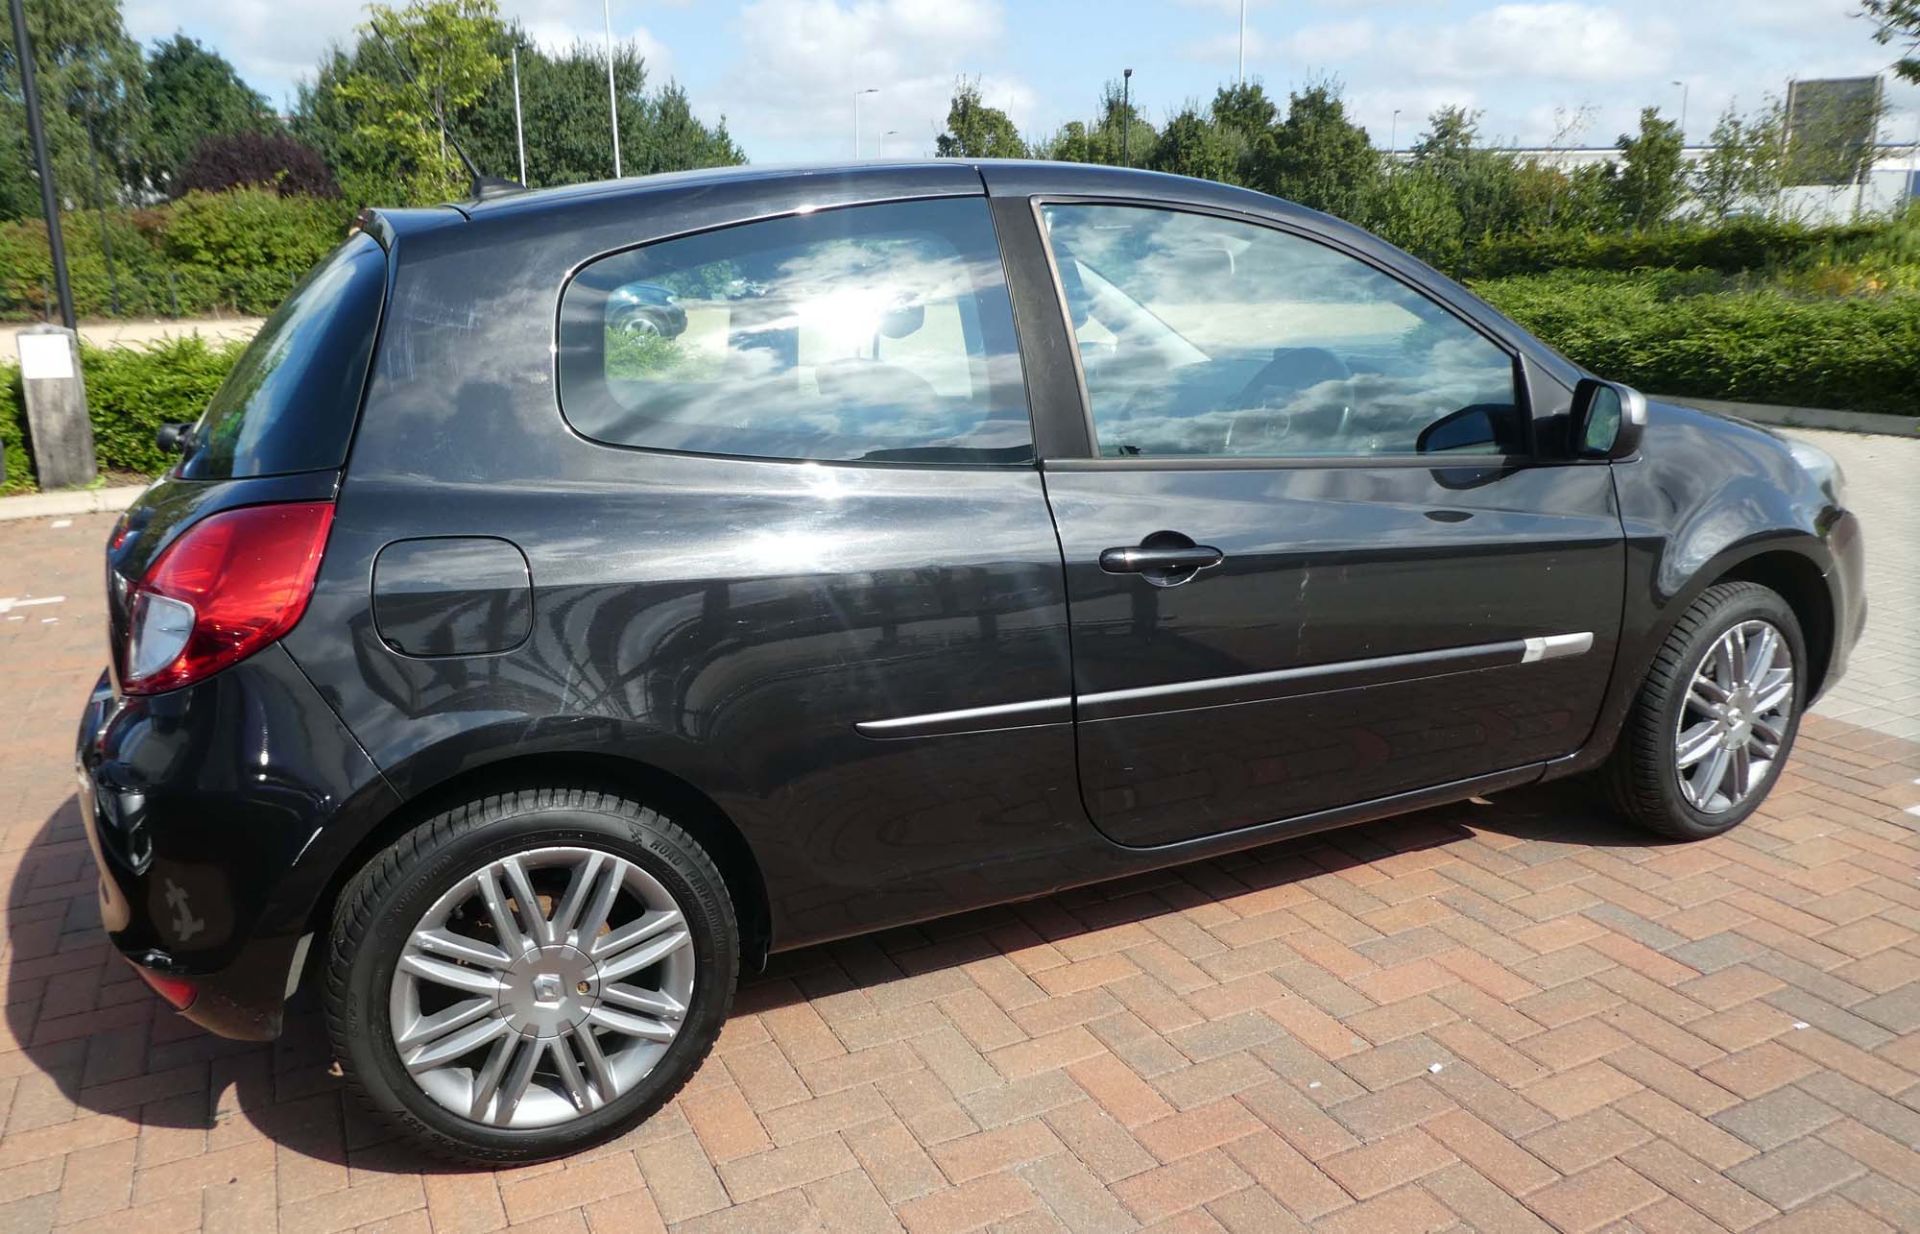 KU61 YTB Renault Clio Dynamique Tomtom 16v in black, first registered 26.09.2011, one key, 1149cc, - Image 8 of 12